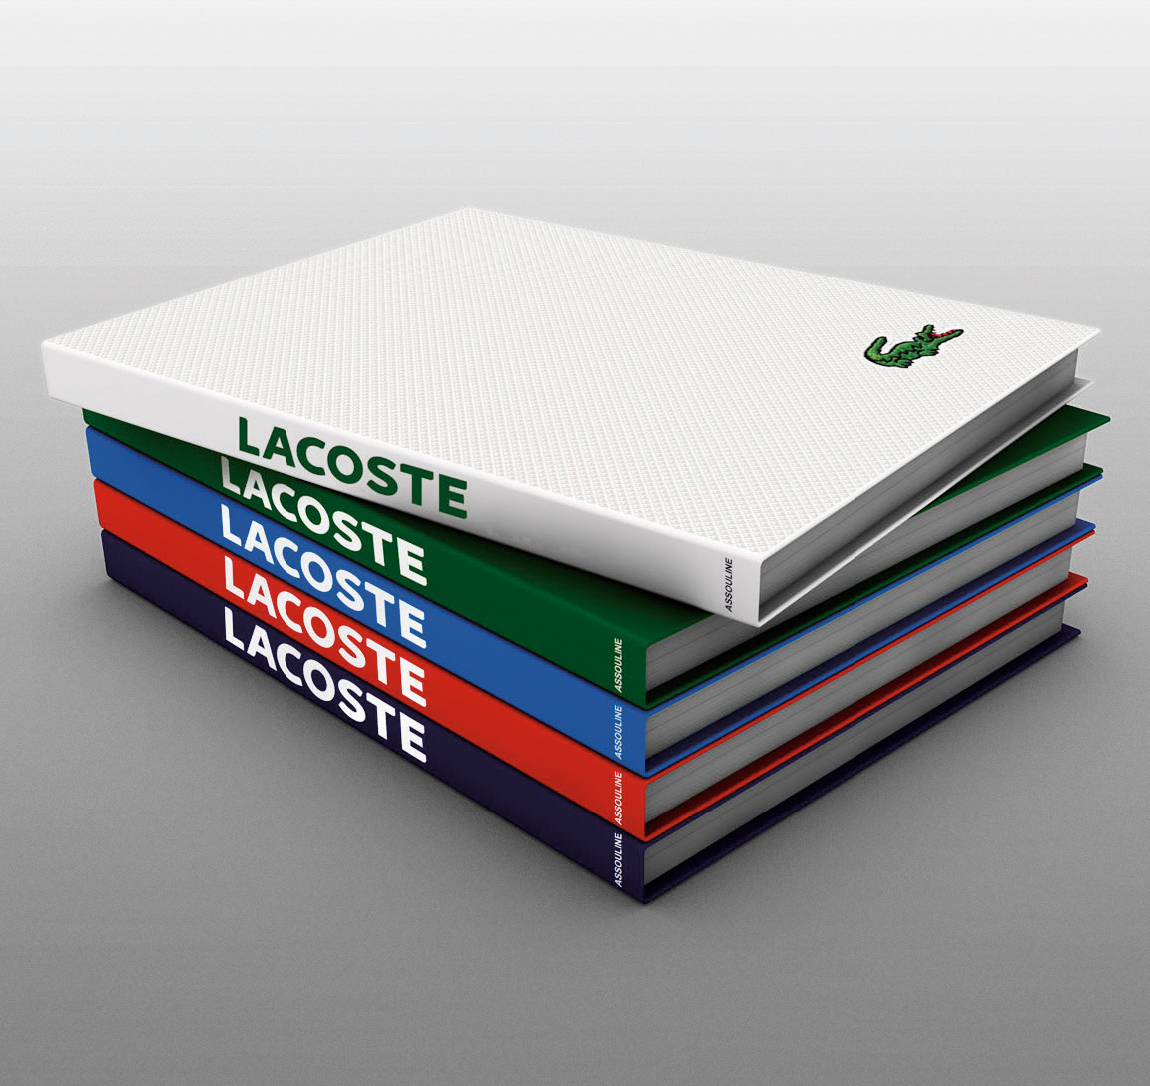 NUVO Magazine: Lacoste's Style Story